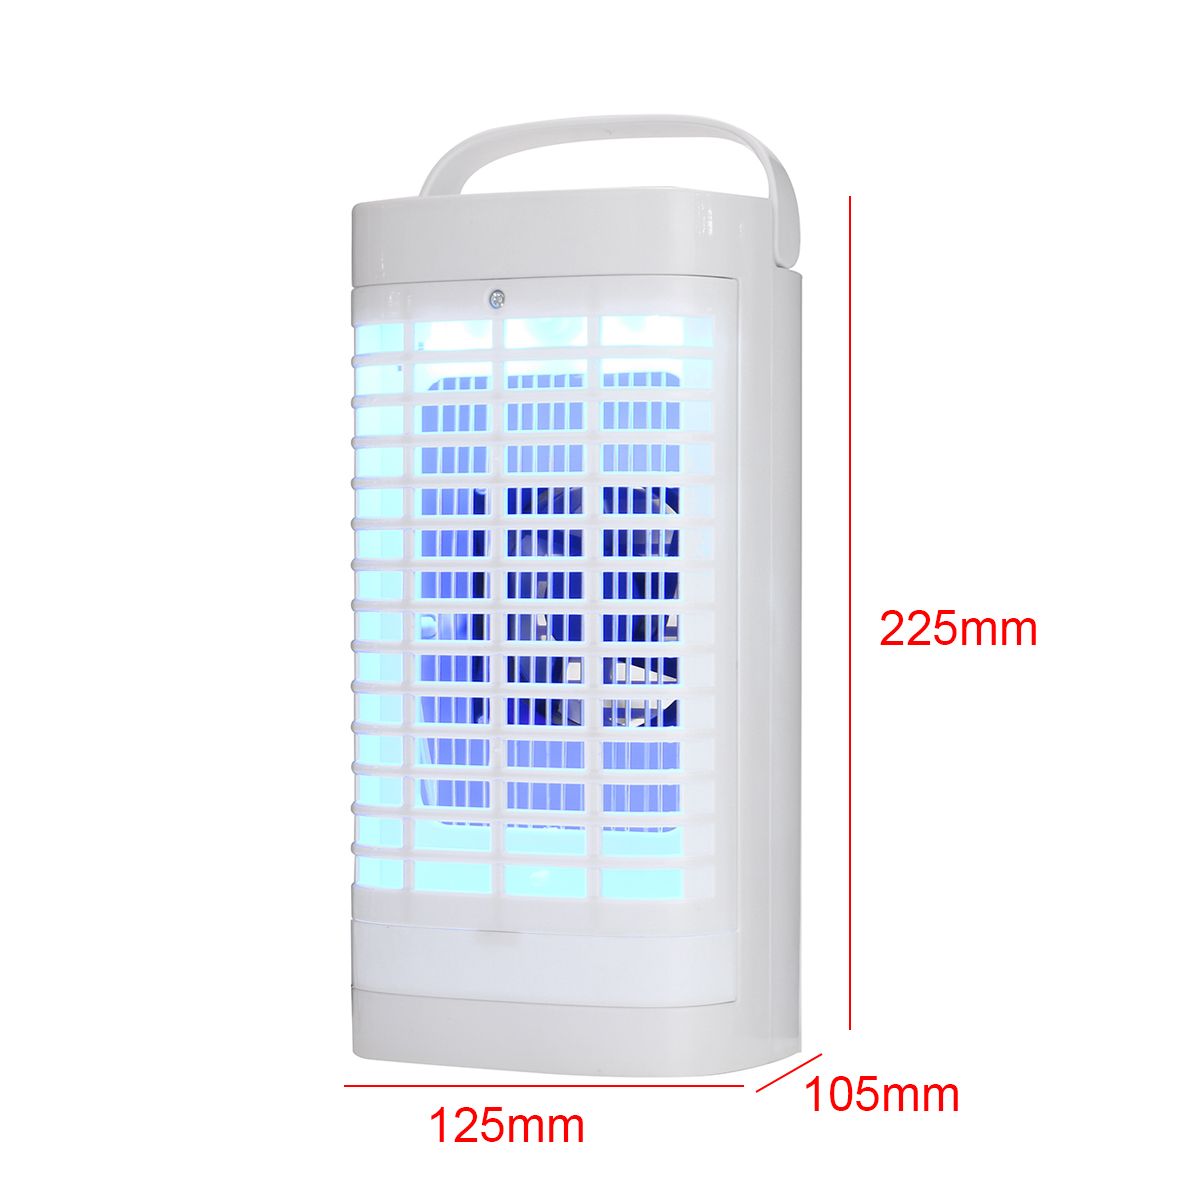 Electric-Shock--Suction-Mosquito-Repellent-Light-Mute-LED-Lamp-Insect-Killer-1678238